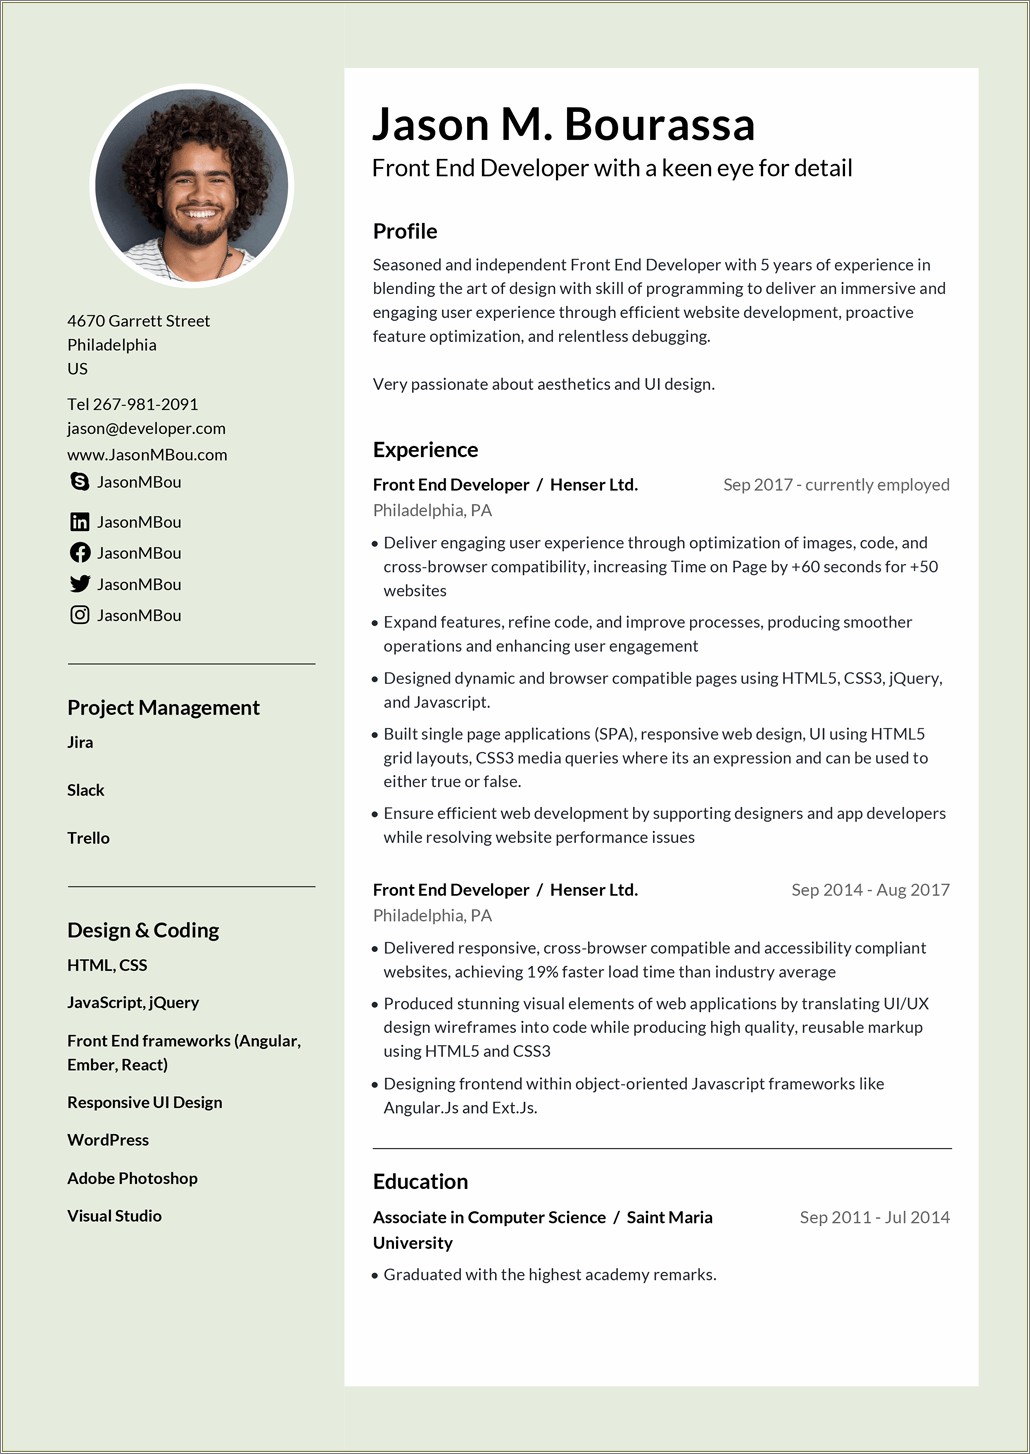 Resume Templates For Computer Science Freshers